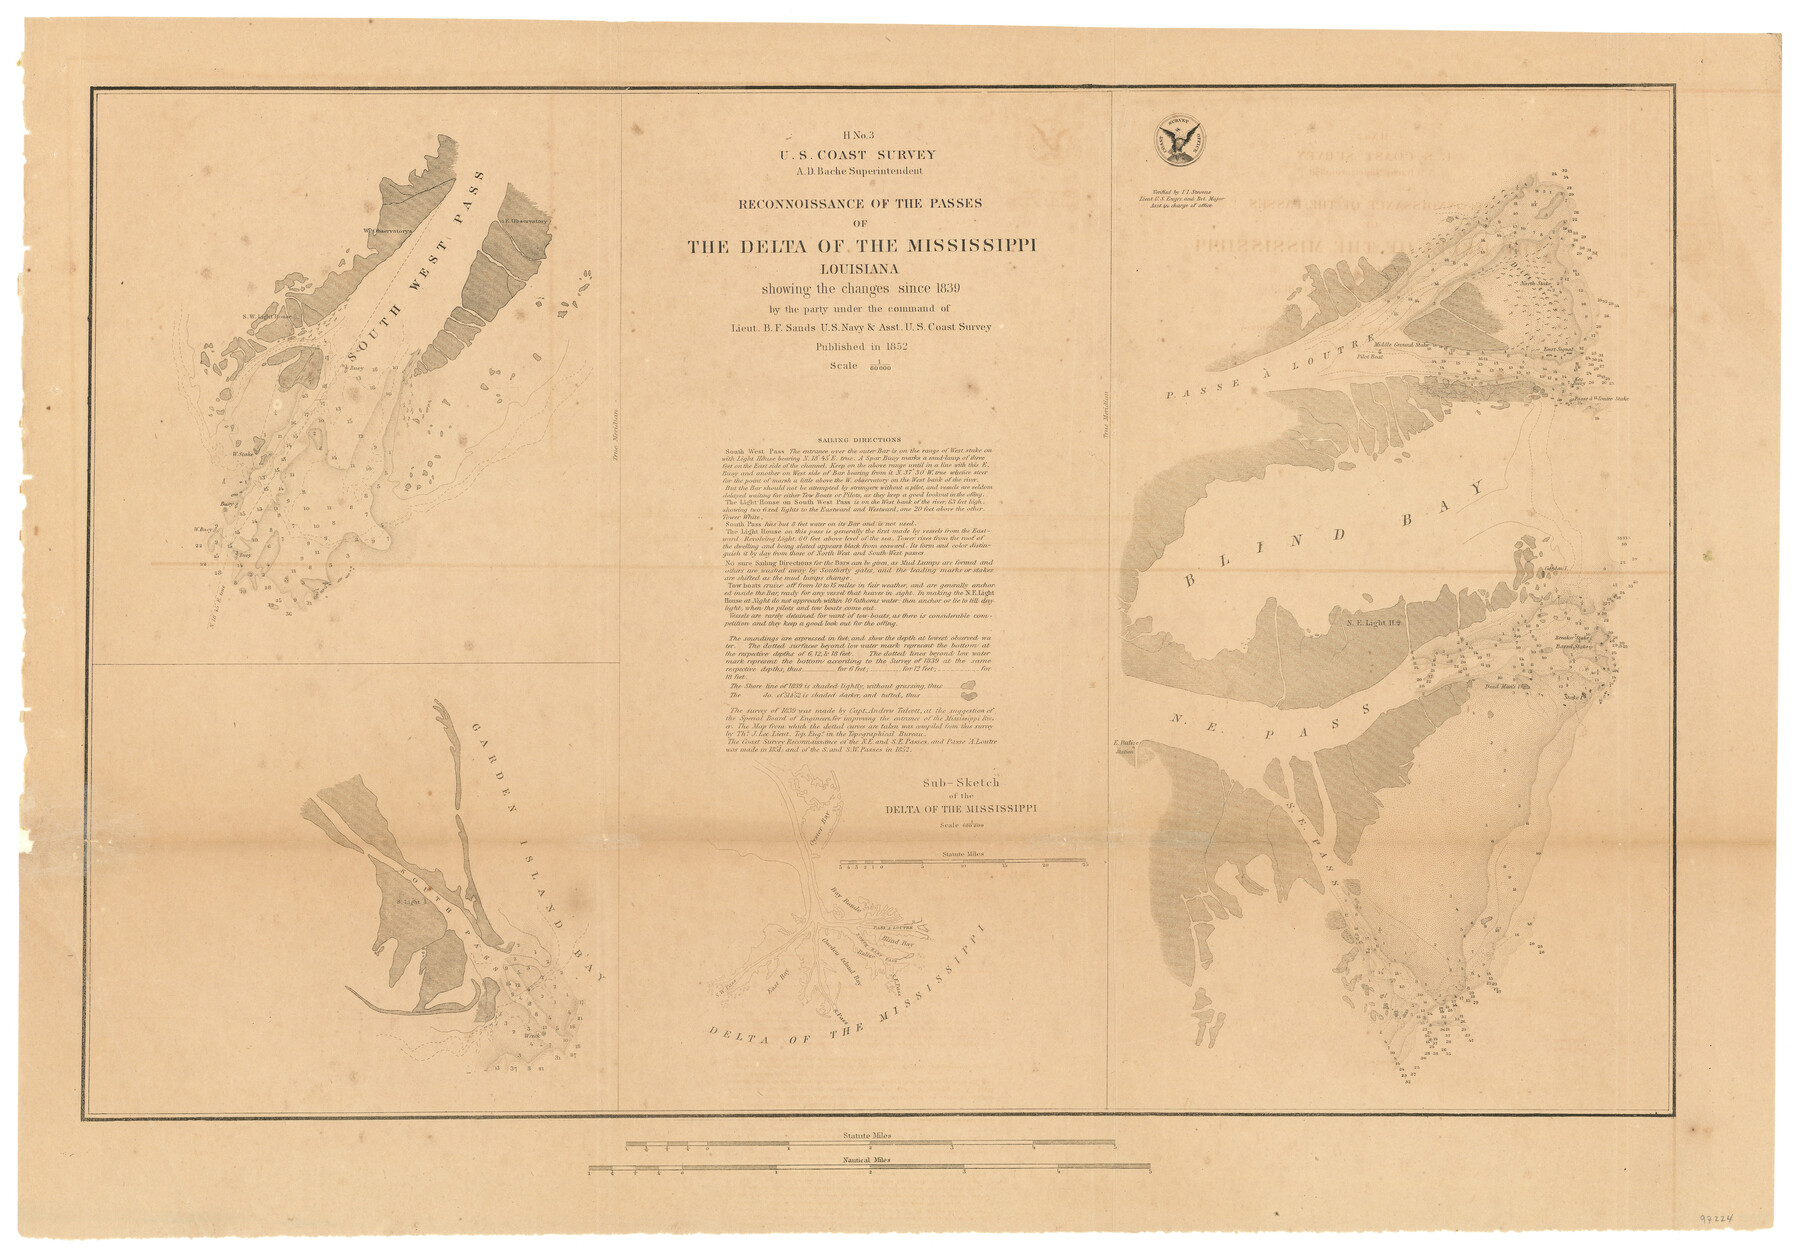 97224, H No. 3 - Reconnoissance of the Passes of the Delta of the Mississippi, Louisiana showing the changes since 1839, General Map Collection